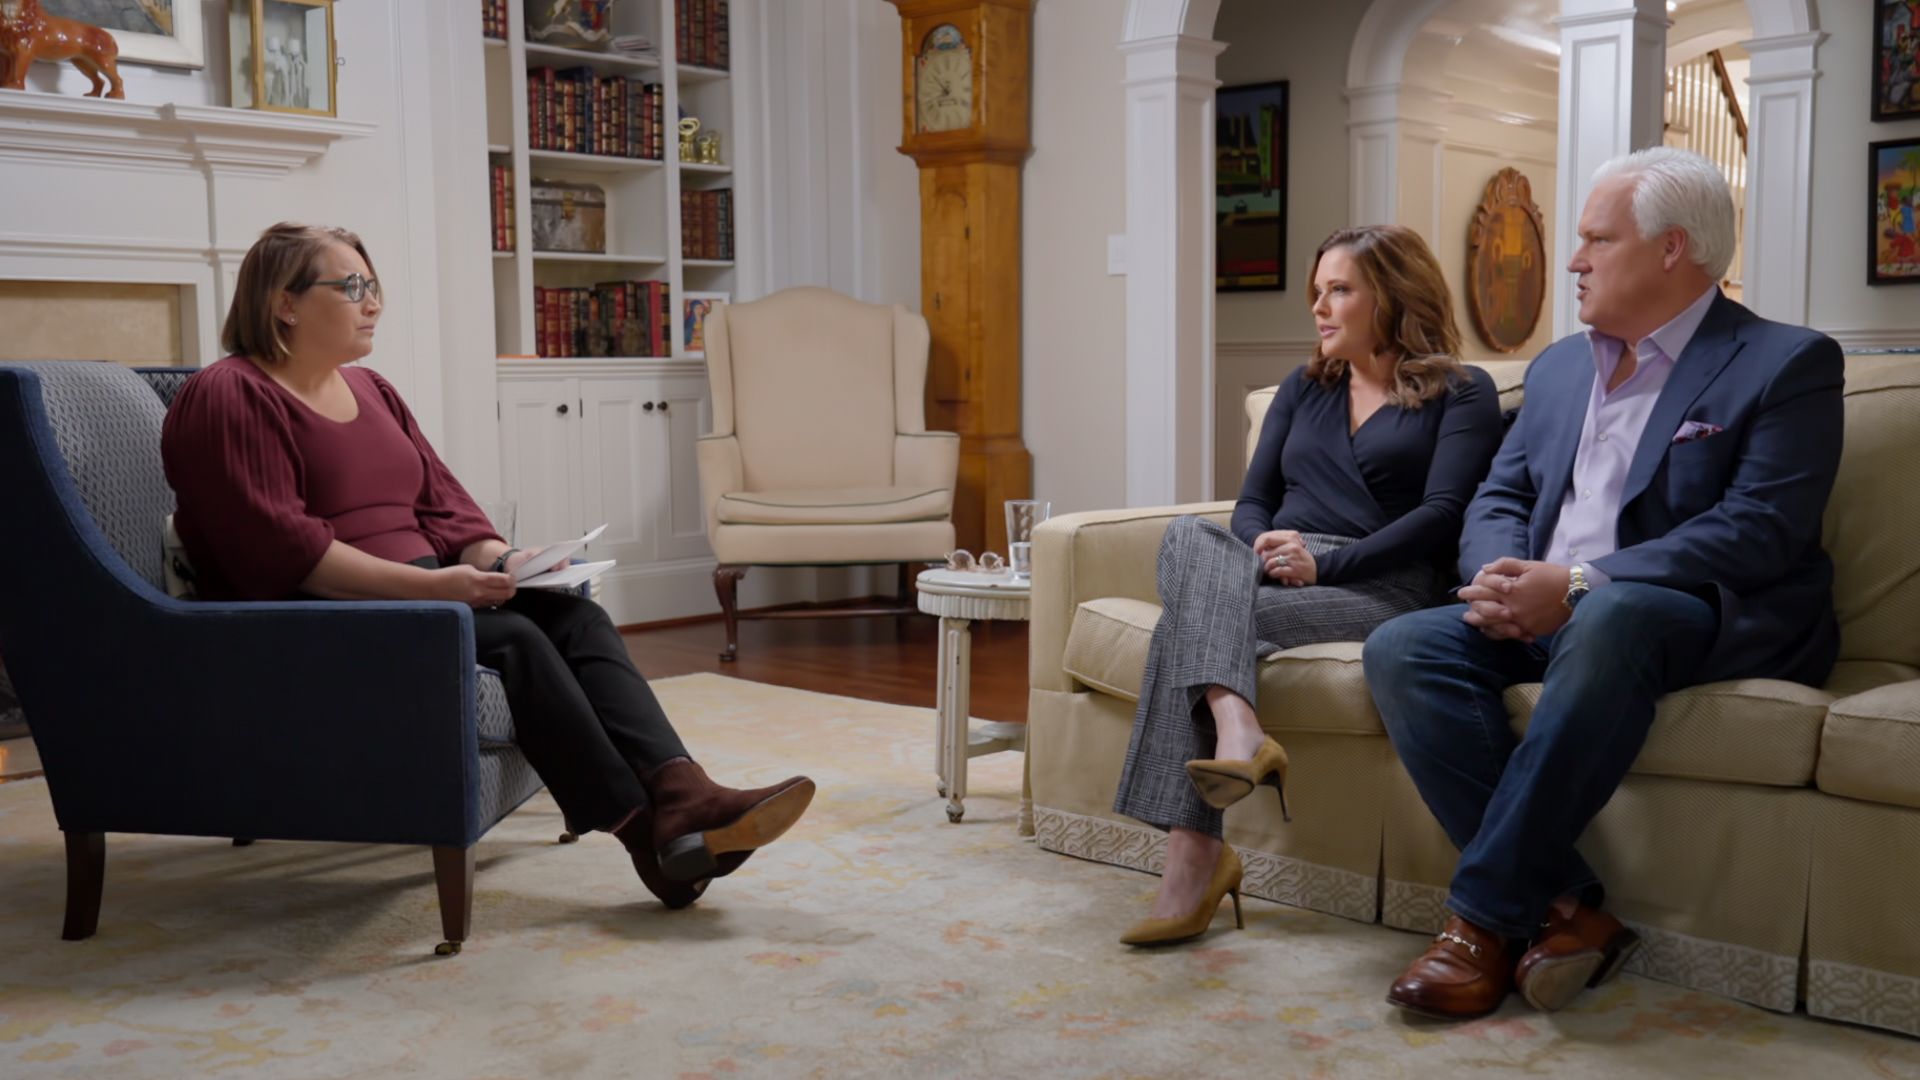 Matt and Mercedes Schlapp are seen seated side-by-side during an interview for "Axios on HBO."